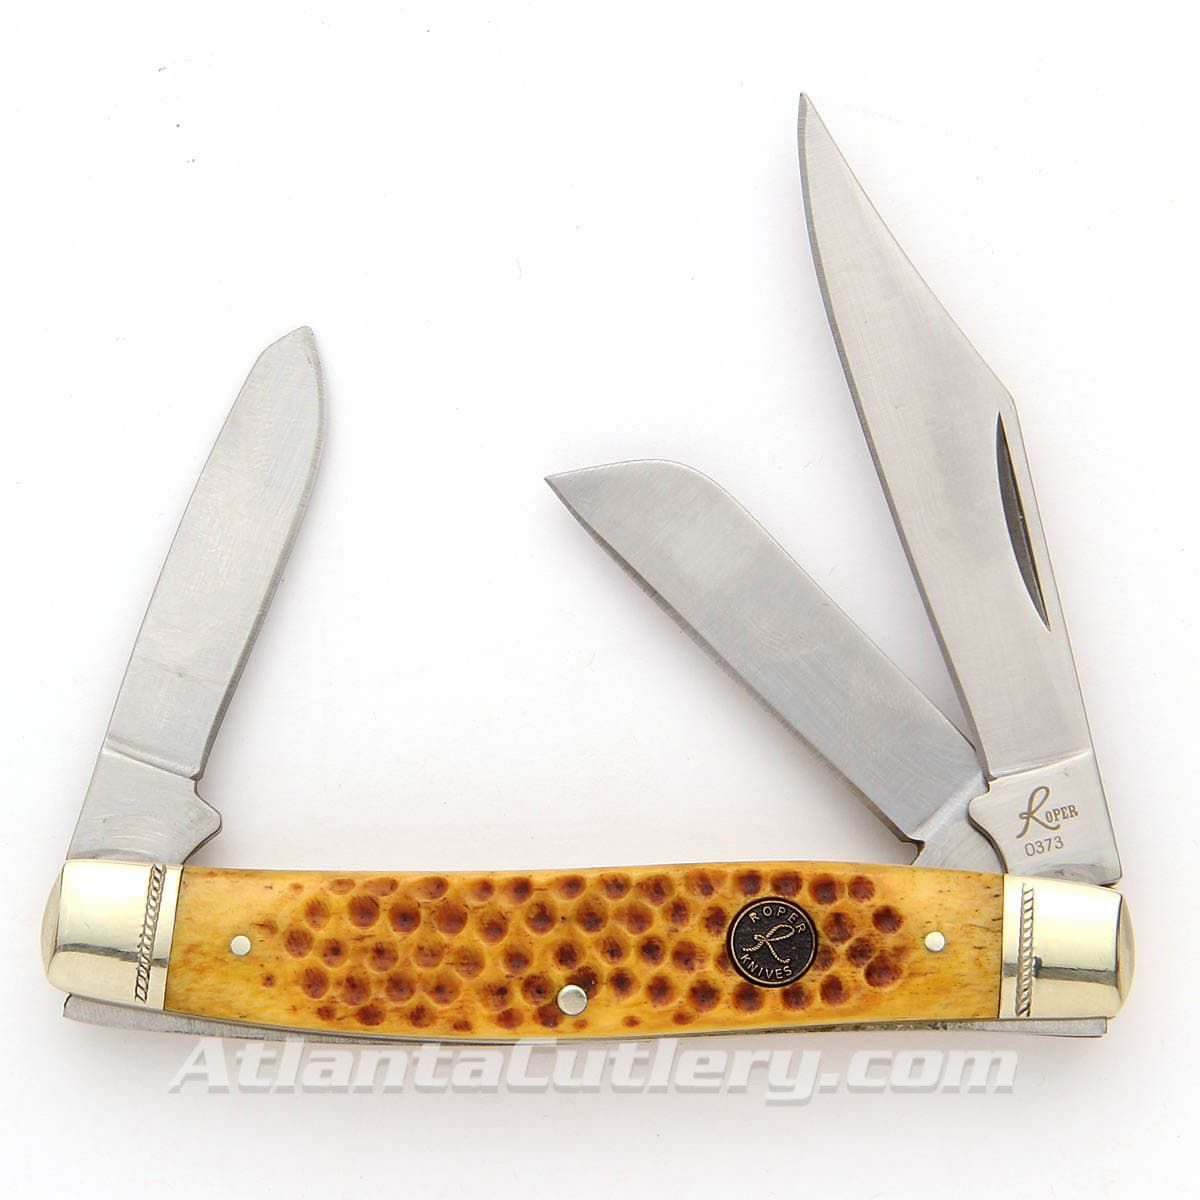 Roper pocket knife with 3 sharp 1065 carbon steel blades, real jigged bone scales, nickel silver bolsters and brass liners